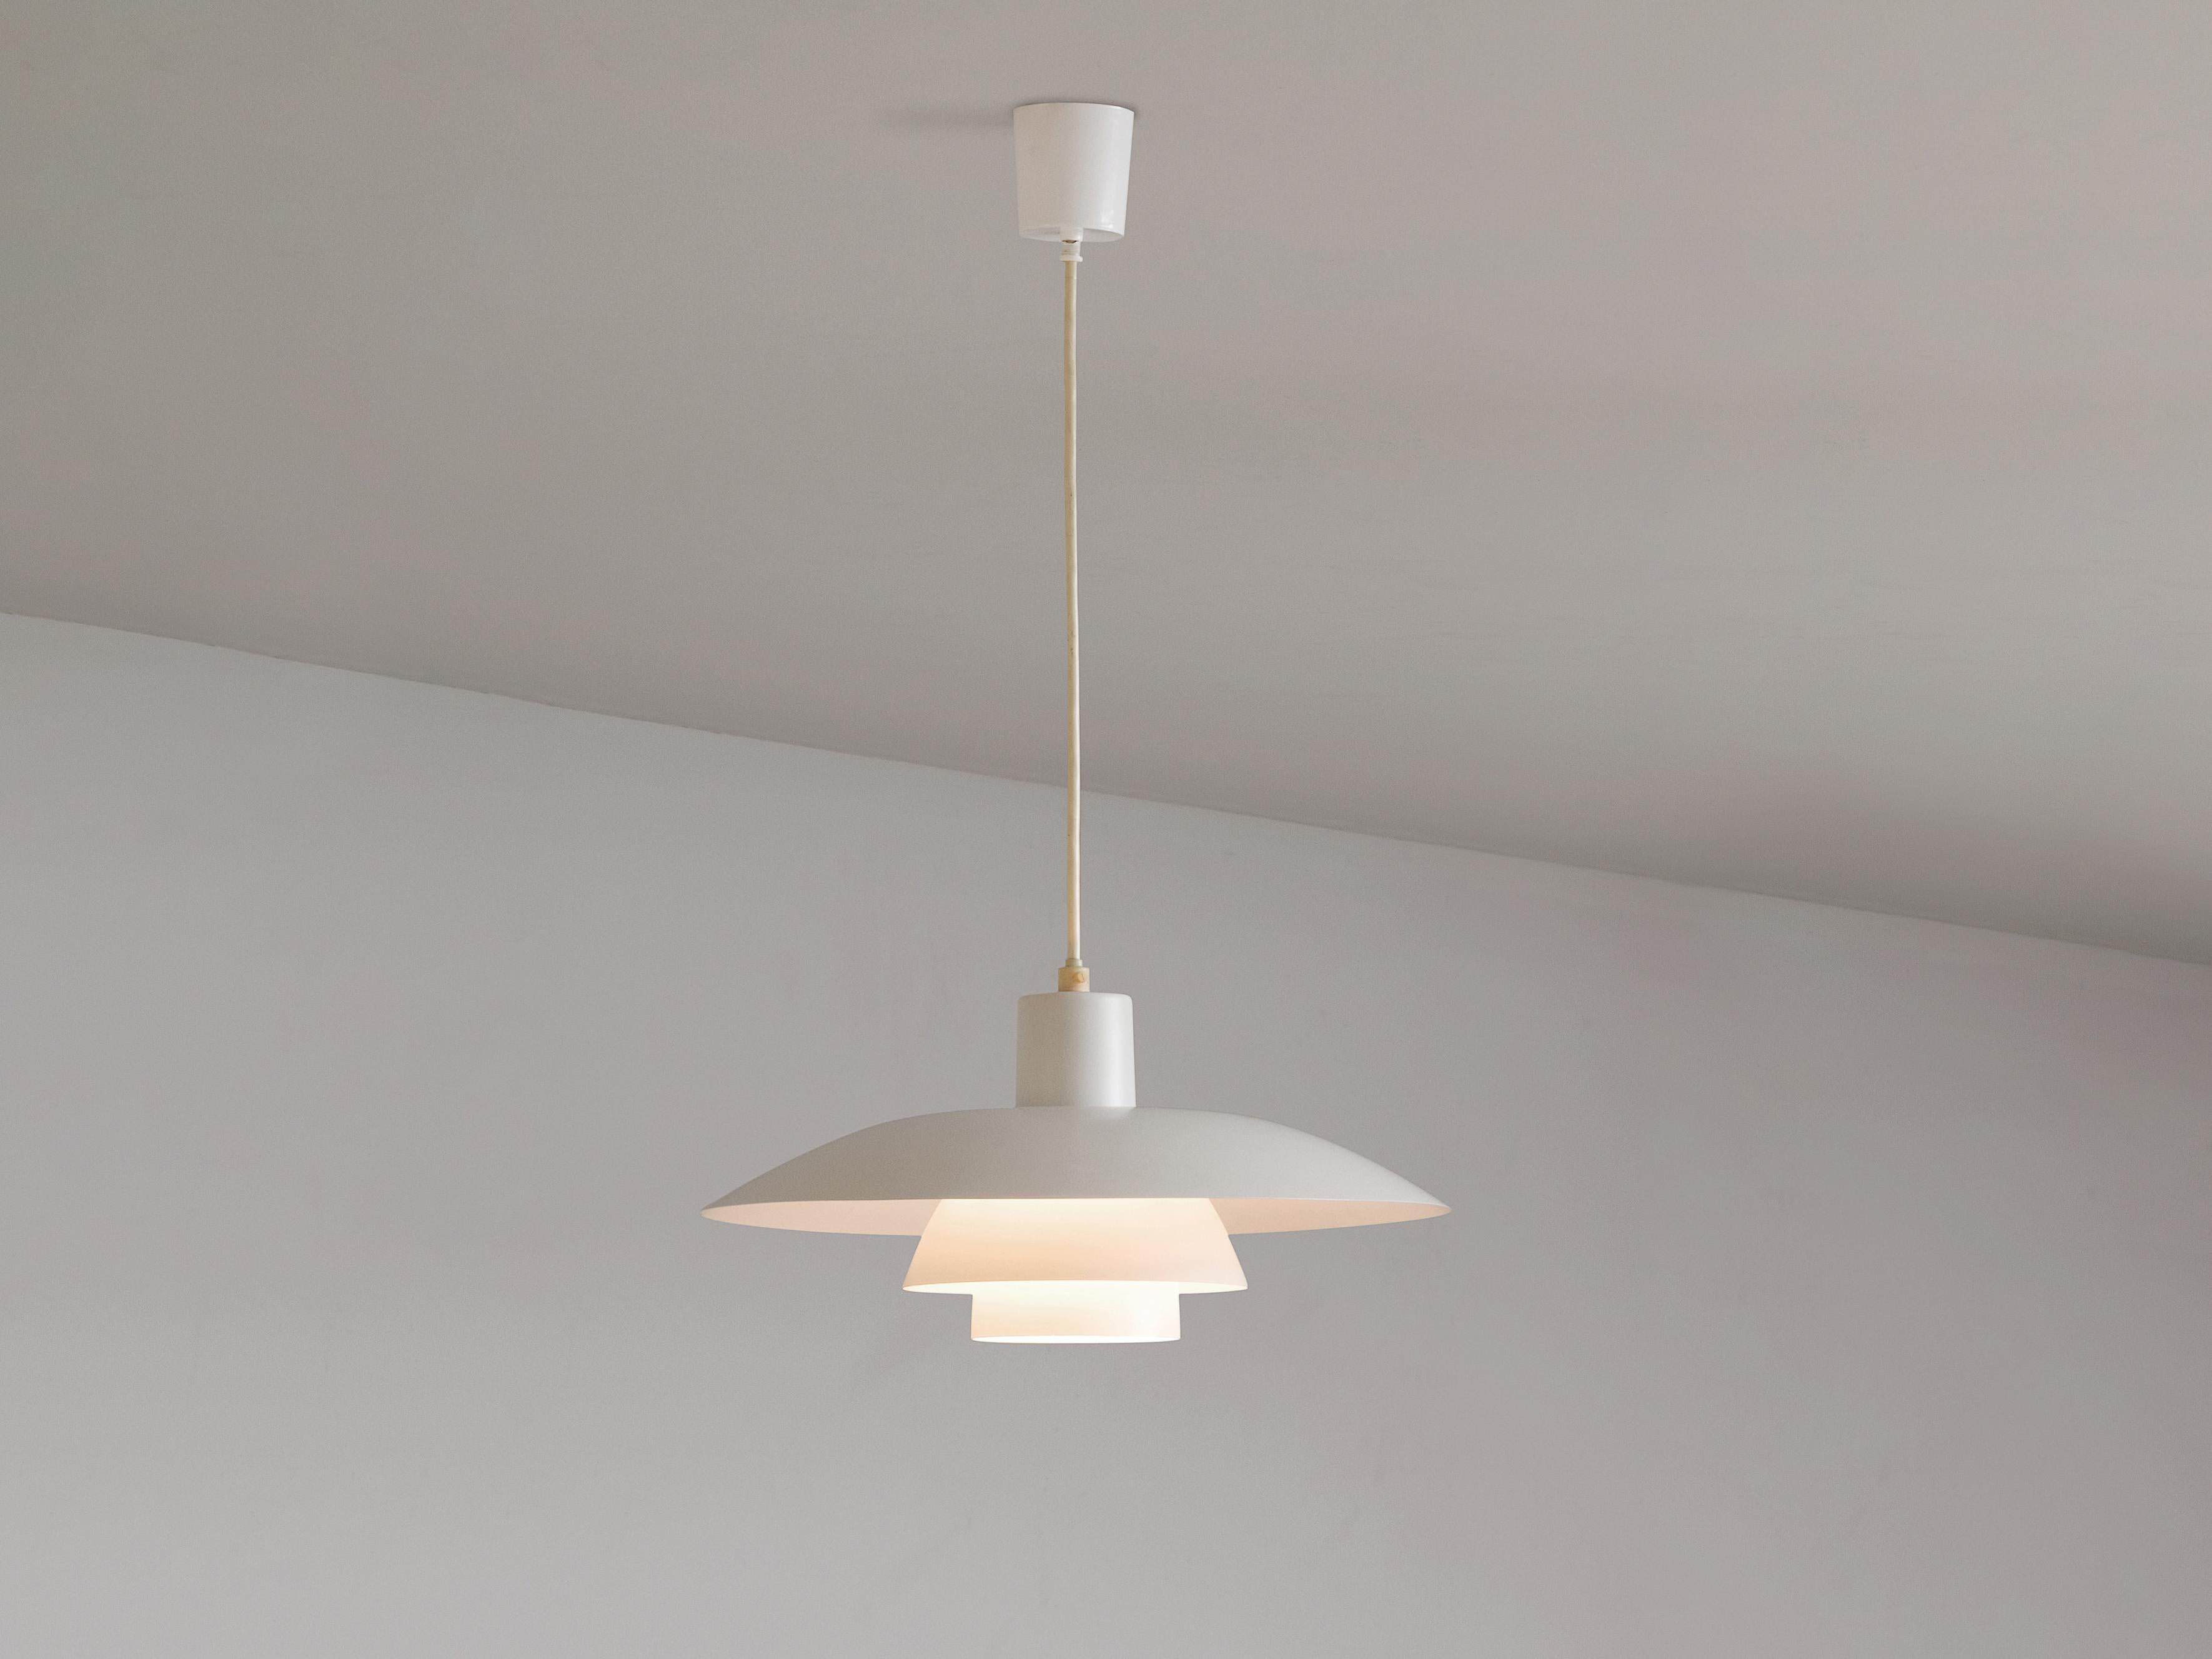 Poul Henningsen for Louis Poulsen, pendant, model PH4/3, metal, Denmark, 1950s

Iconic PH chandelier designed by Poul Henningsen. Consisting of three curved shades in white coated metal. The spectator has no direct view on the light-source itself.